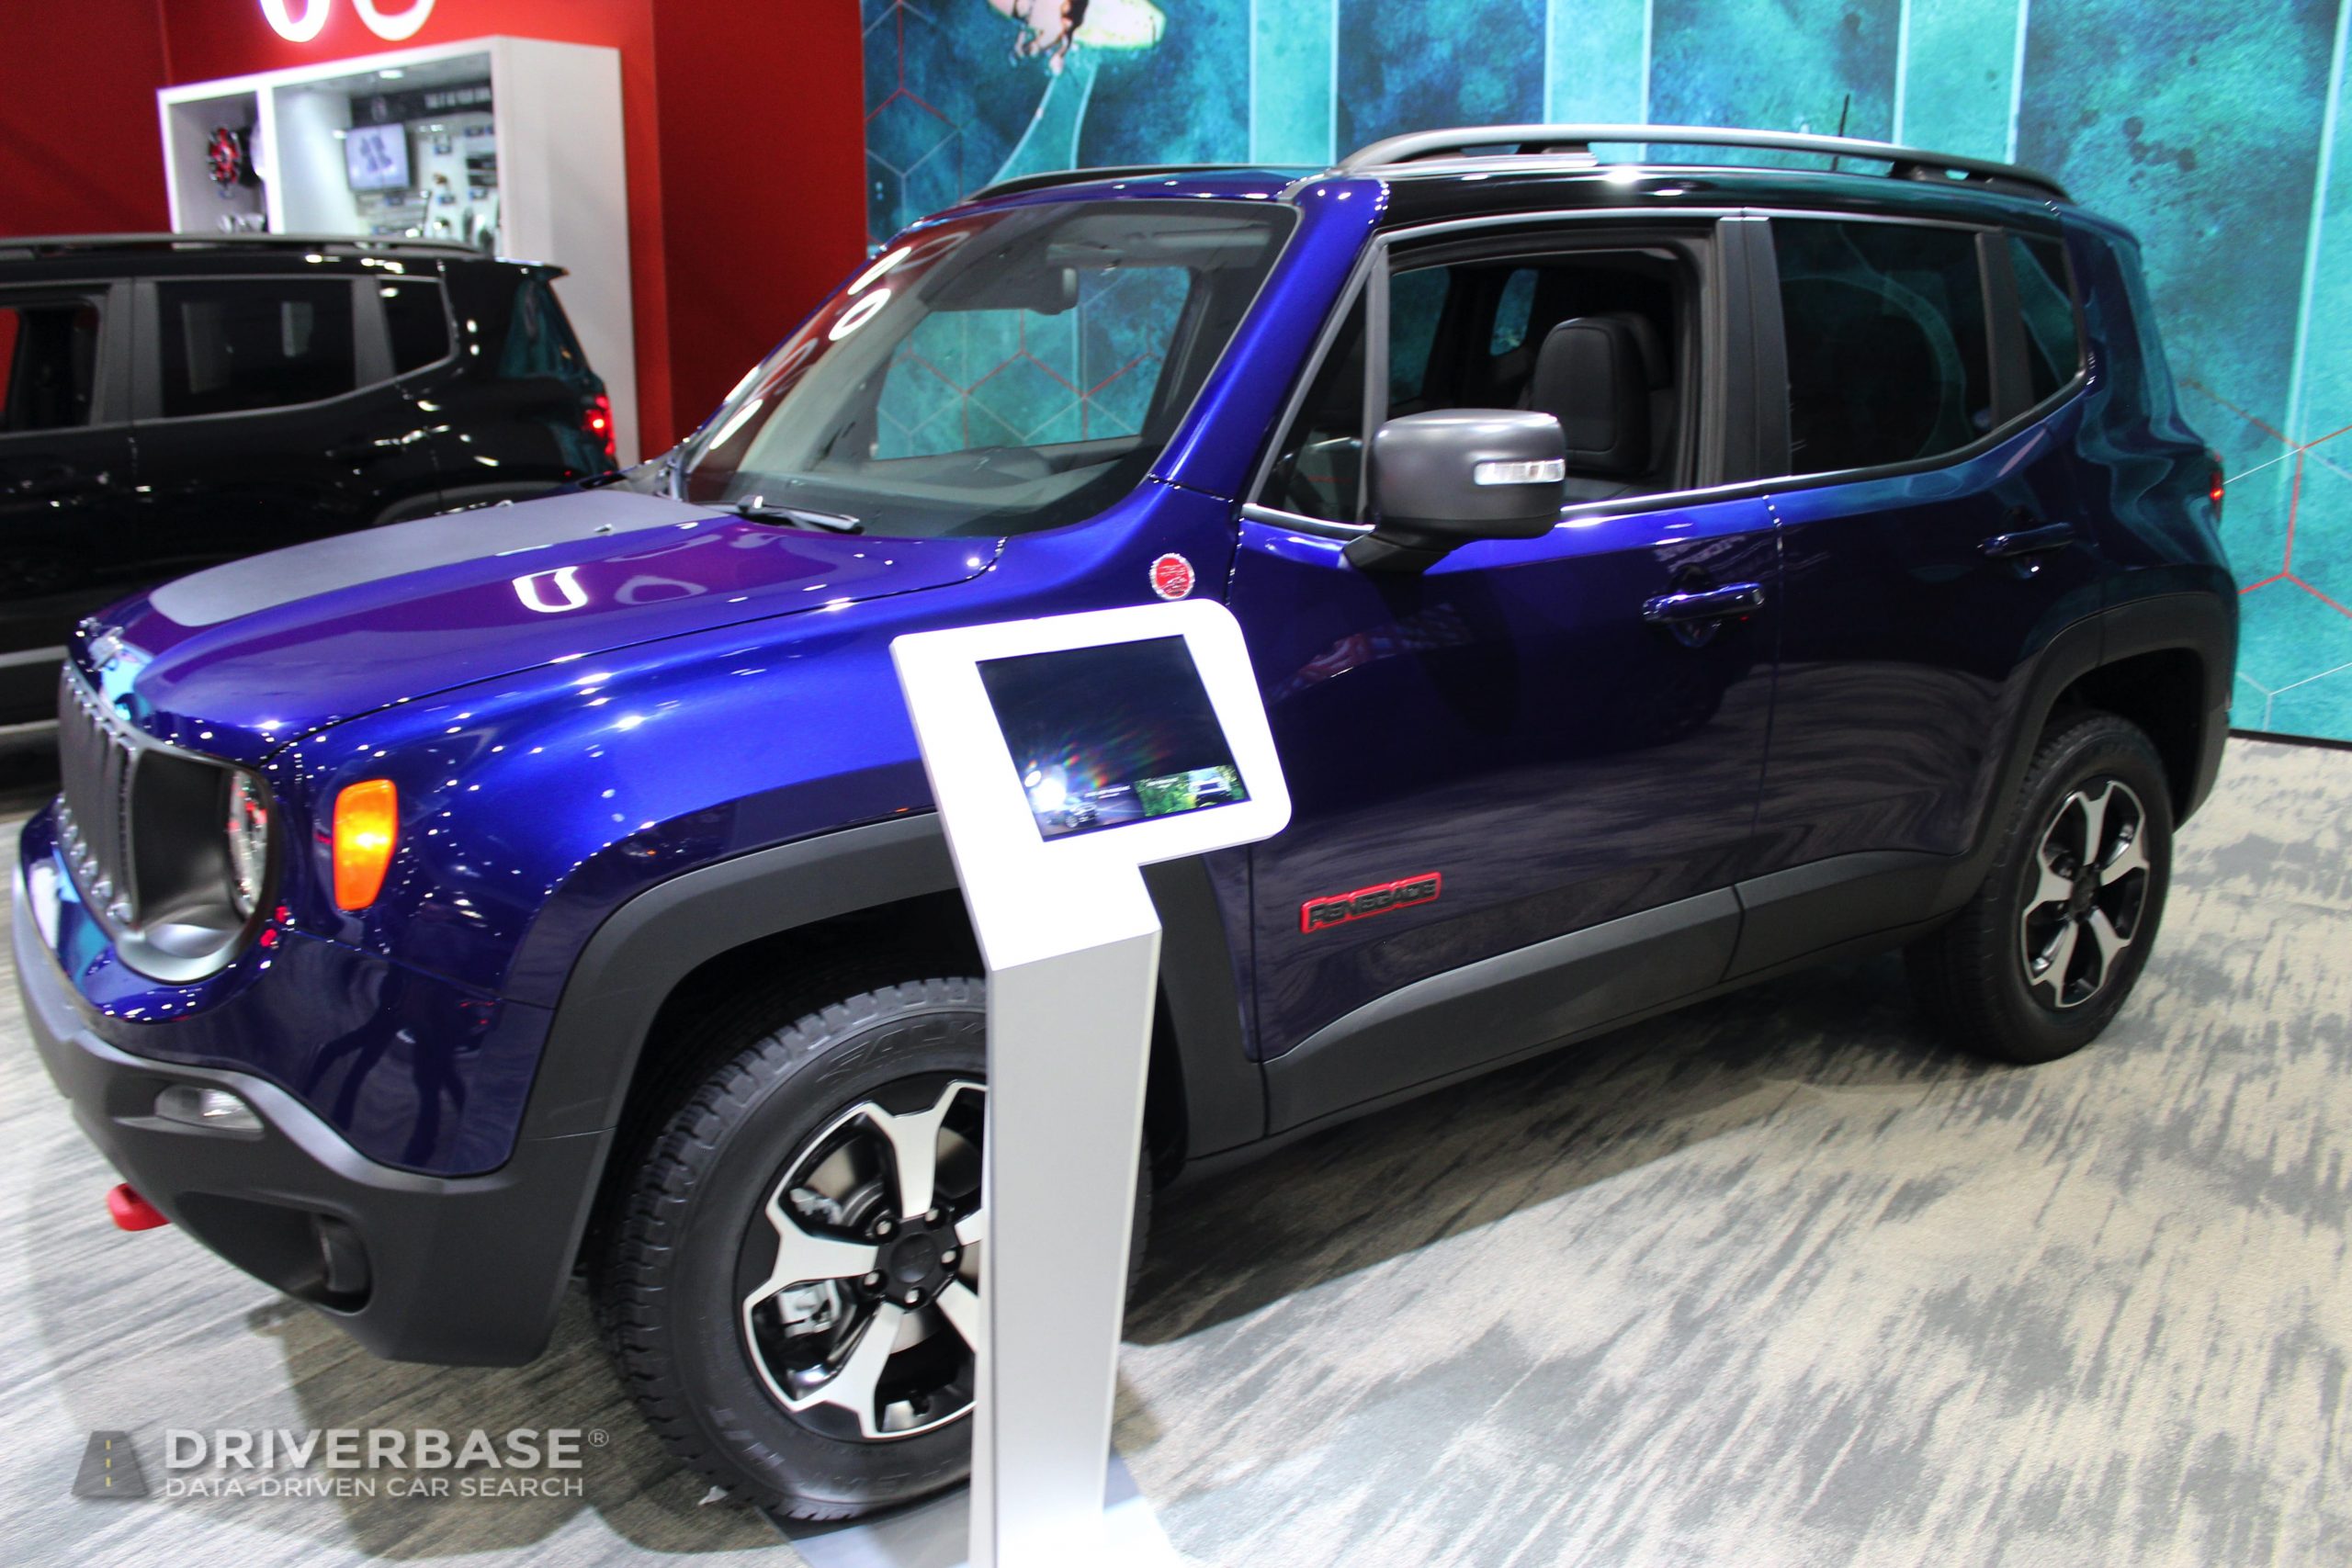 2020 Jeep Renegade Trail Hawk at the 2019 Los Angeles Auto Show